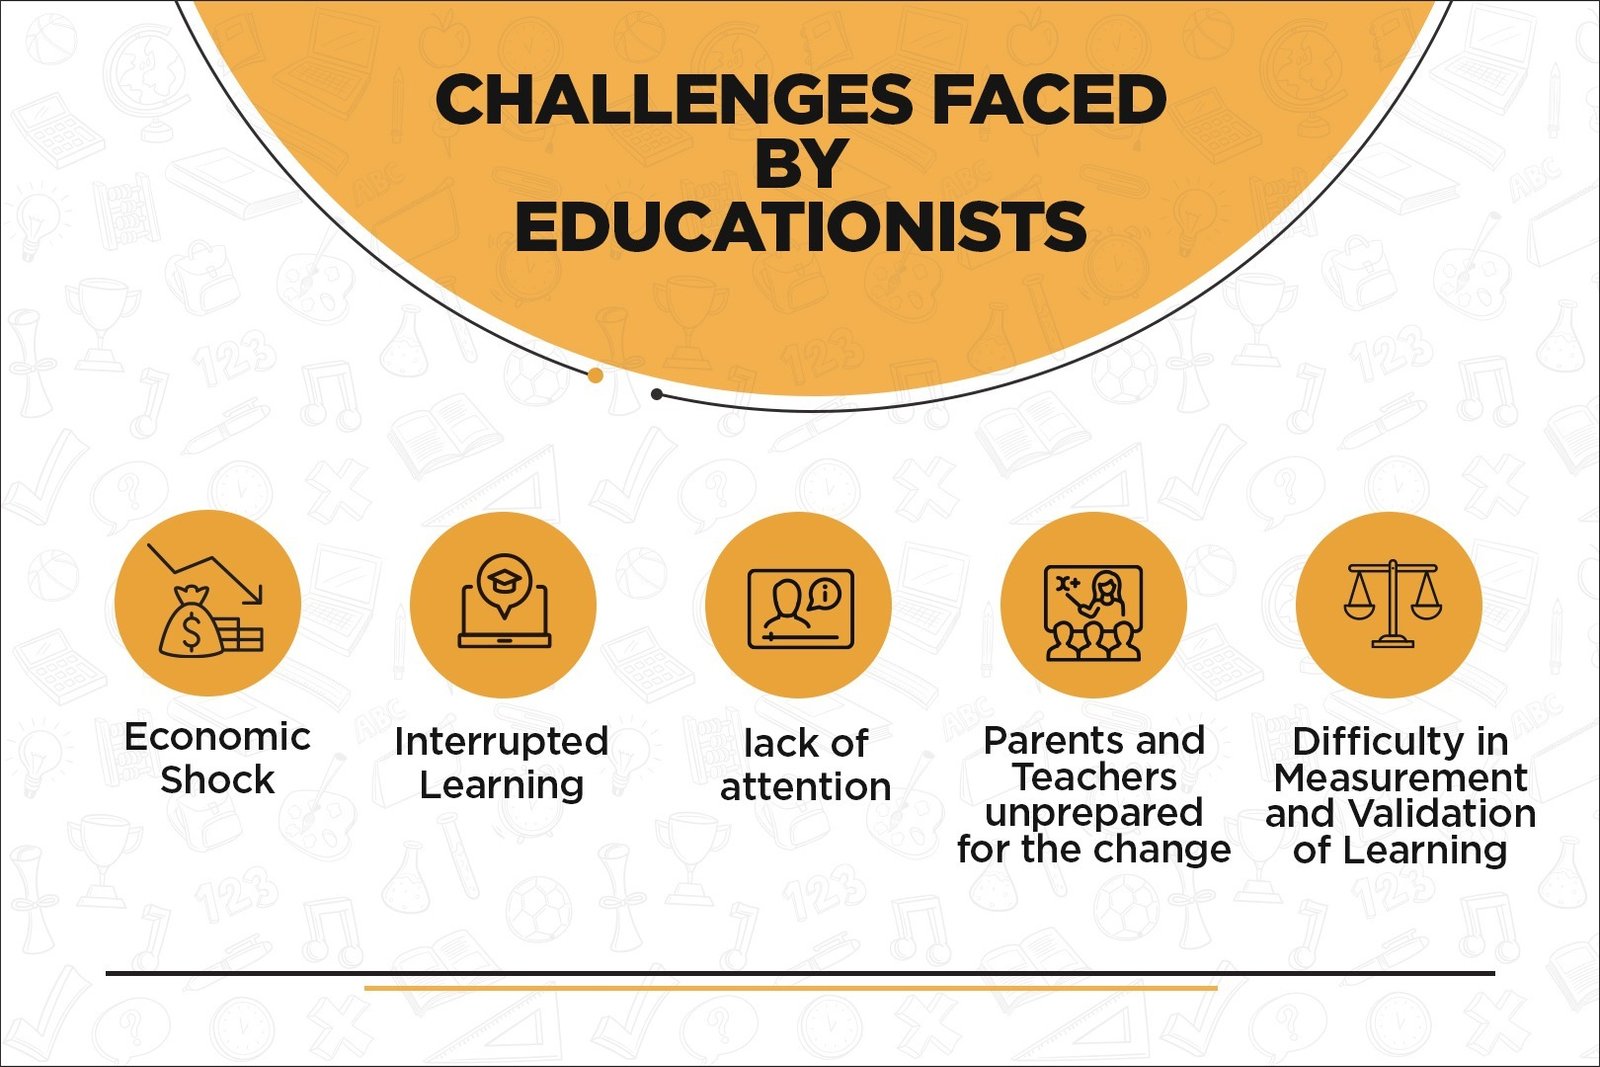 challenges in new normal education essay brainly